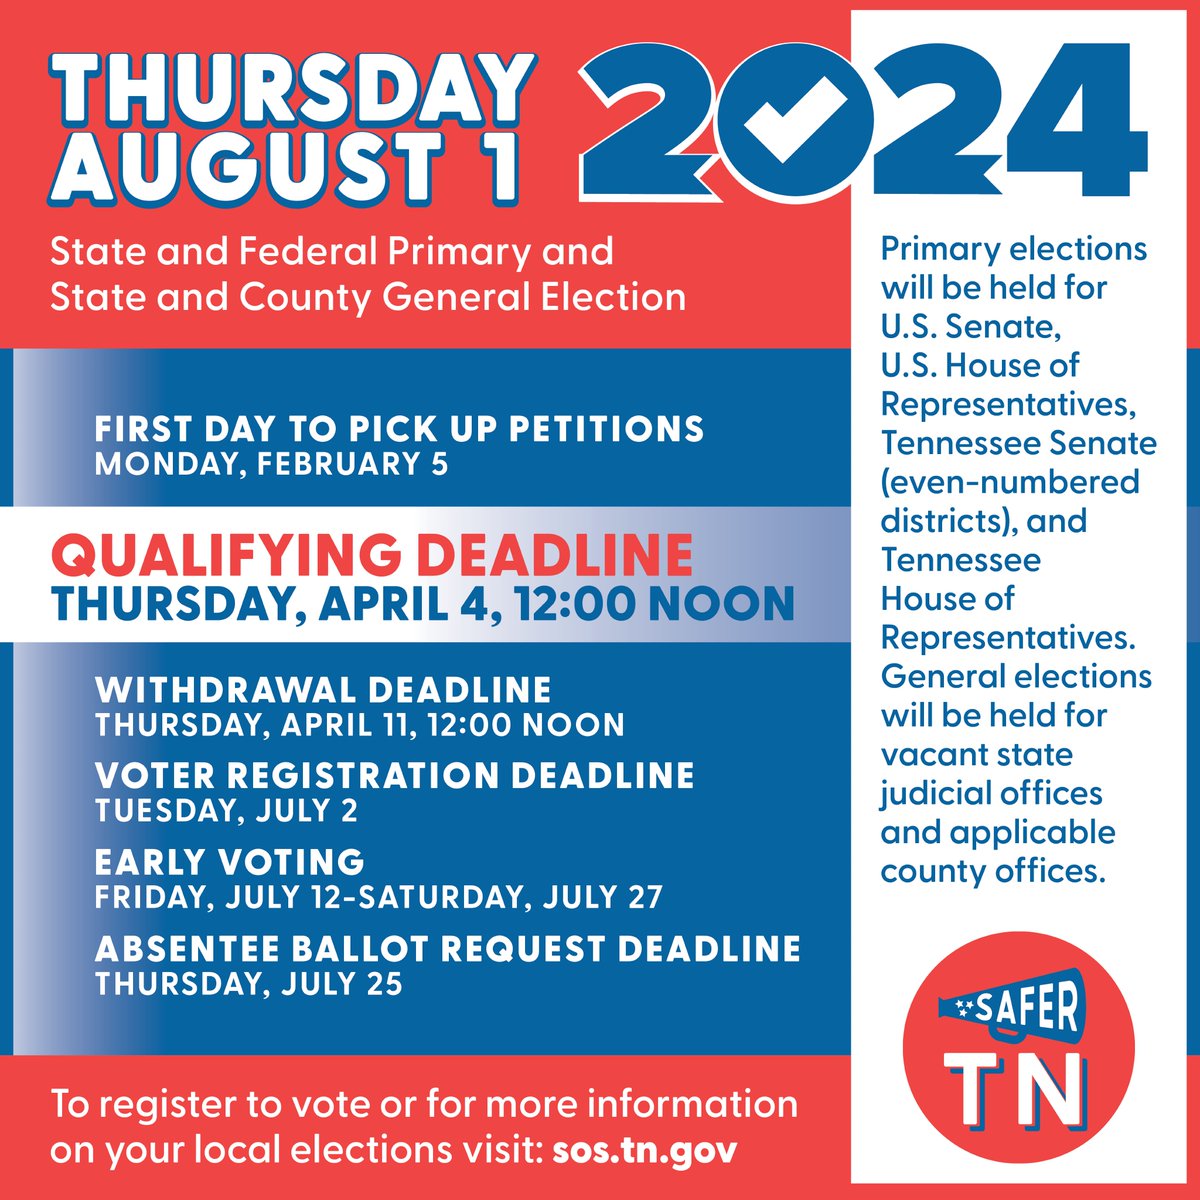 QUALIFYING DEADLINE TO BE A CANDIDATE in the PRIMARY is THIS THURSDAY, April 4, 2024, 12:00 Noon. Primary elections will be held for U.S. Senate, U.S. House of Representatives, Tennessee Senate (even-numbered districts), and Tennessee House of Representatives. General elections…